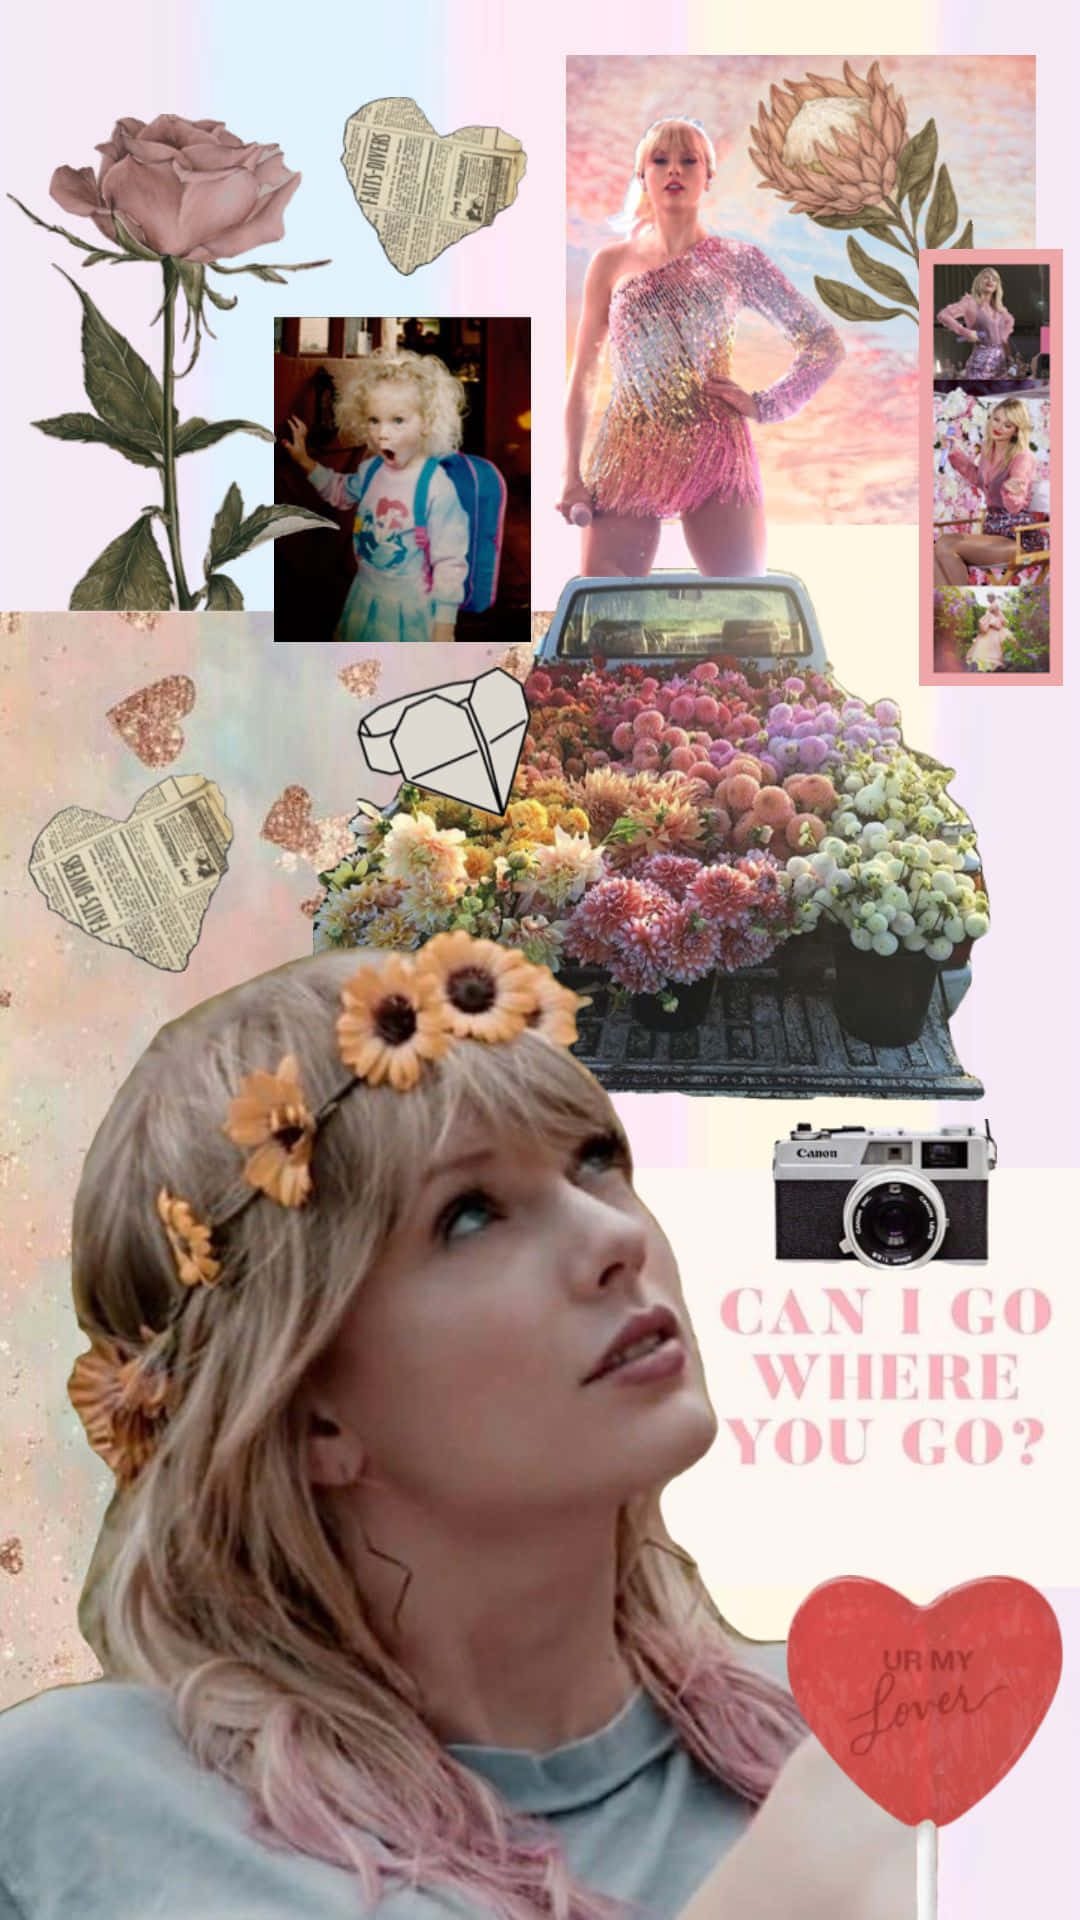 Taylor Swift Pink Aesthetic Collage Wallpaper